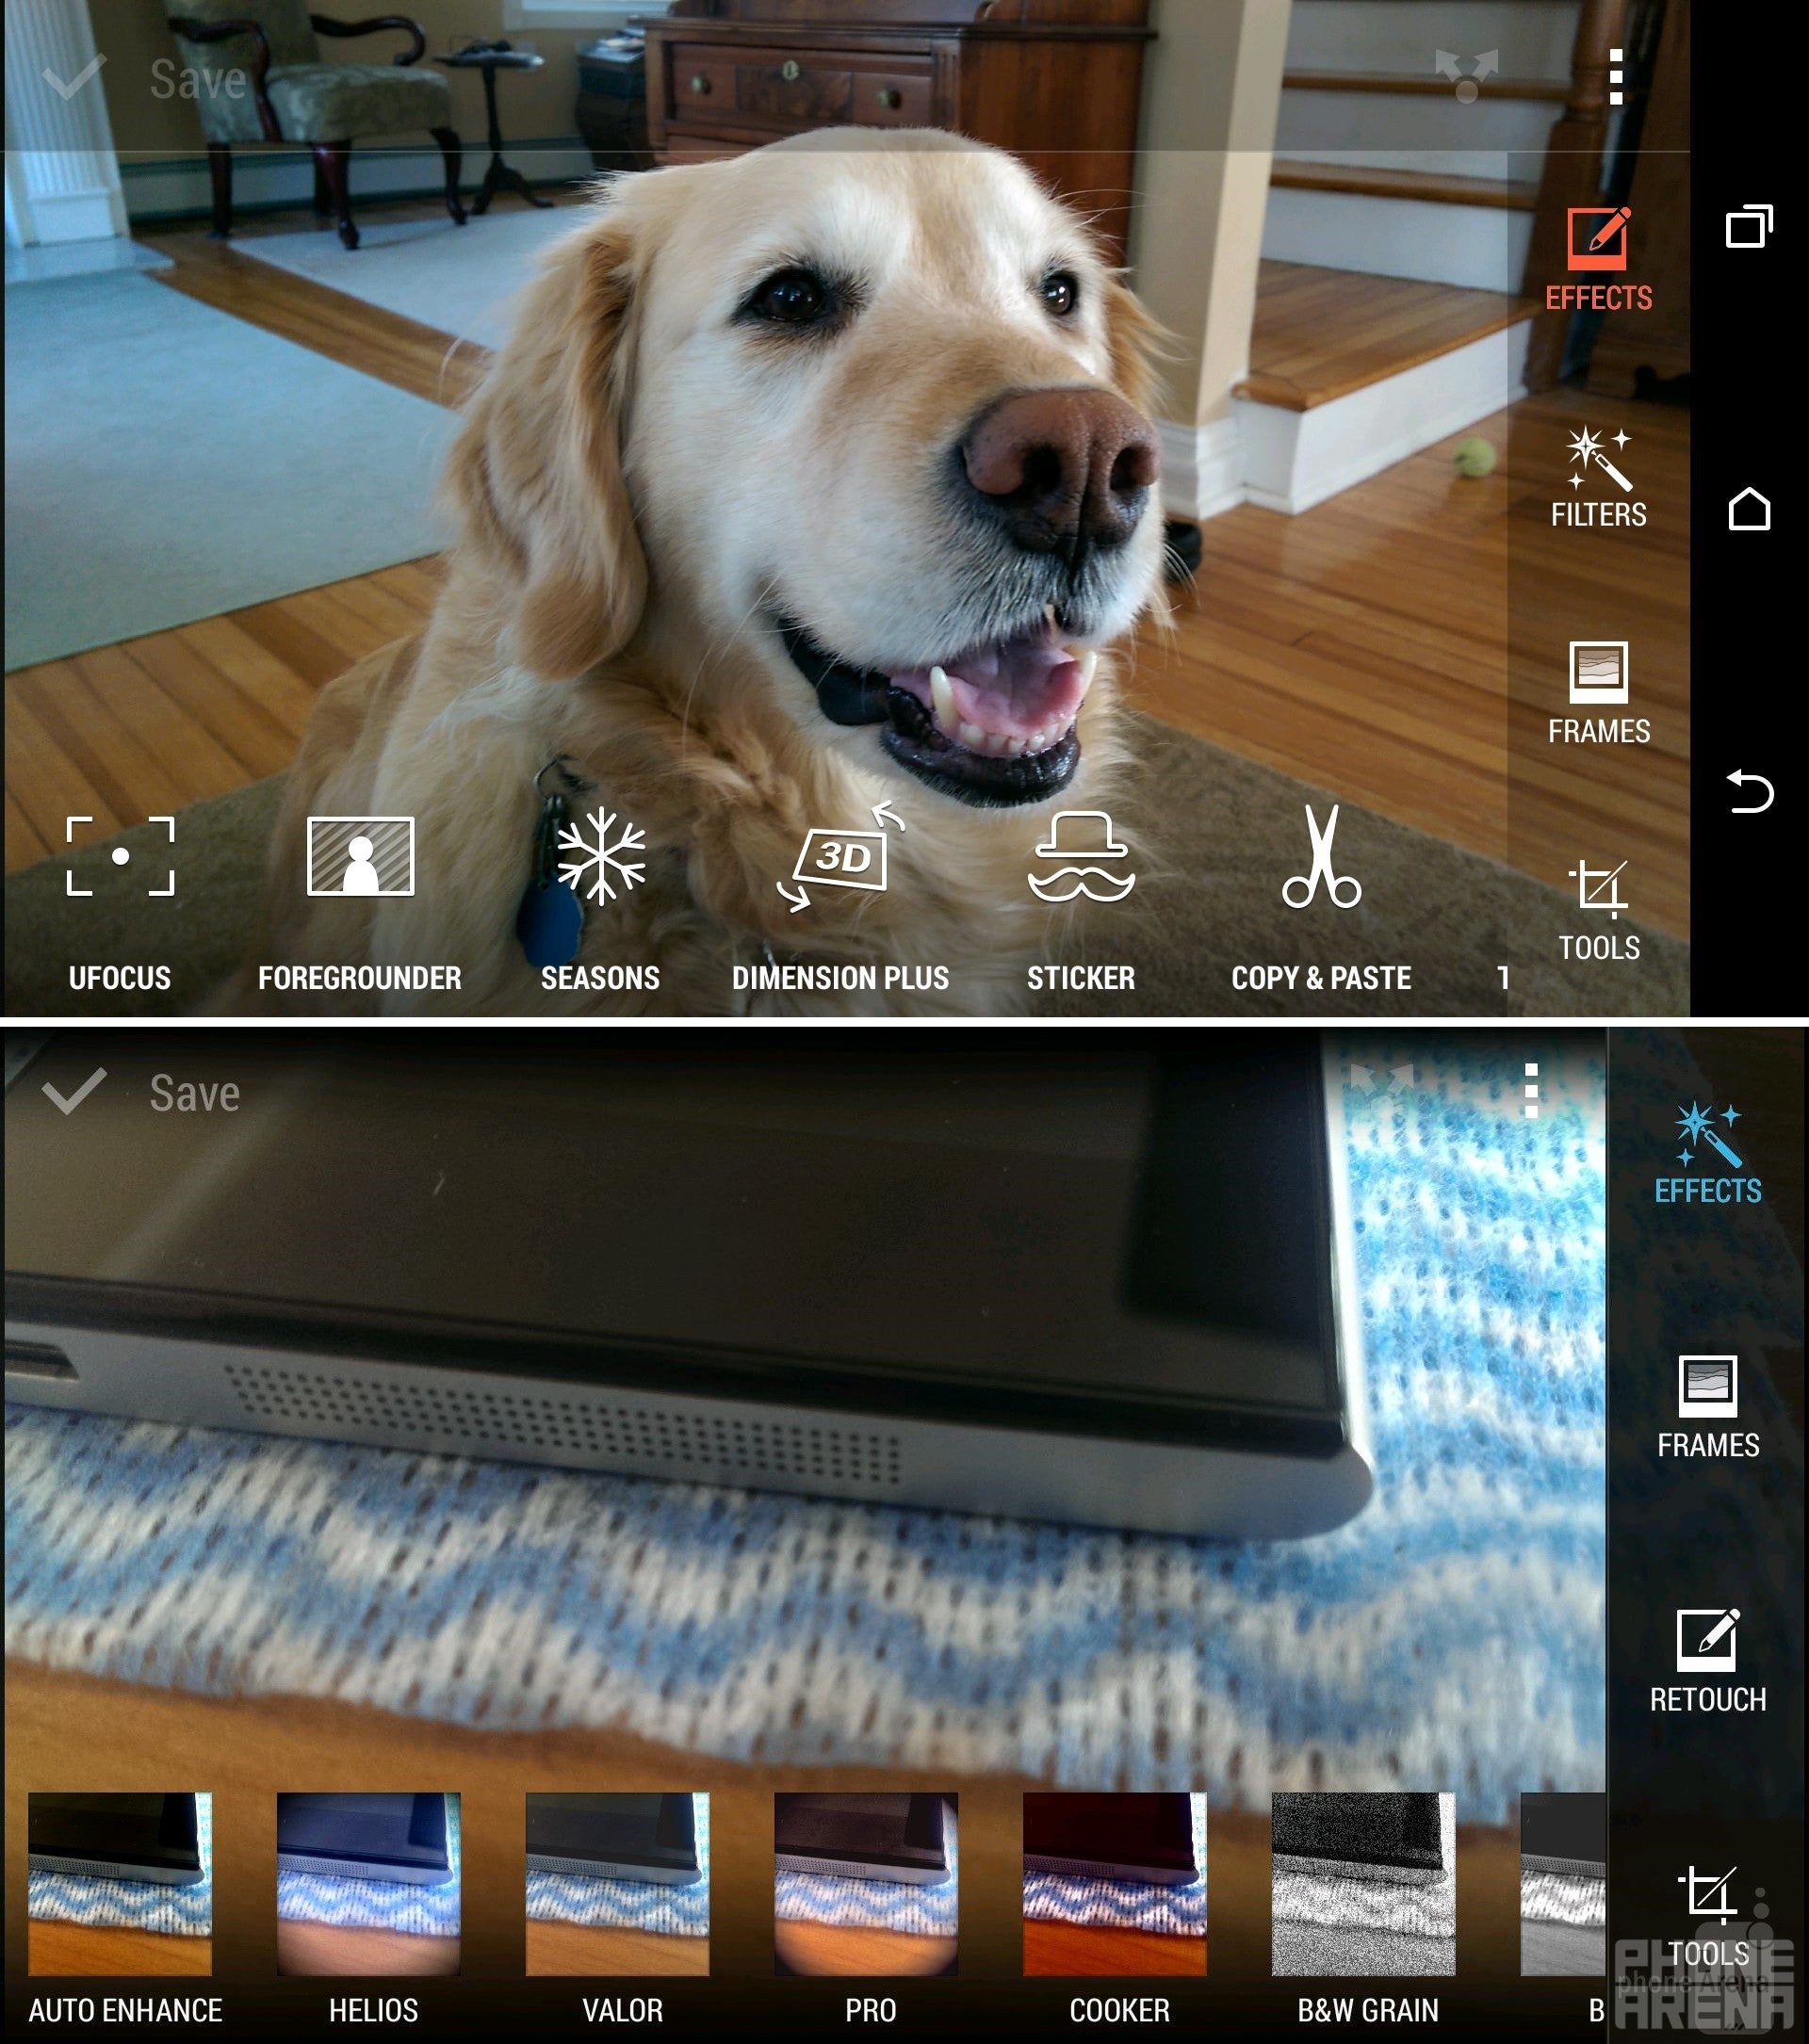 Gallery of the HTC One (M8) - top; HTC One (M7) - bottom - HTC One (M8) vs HTC One (M7)